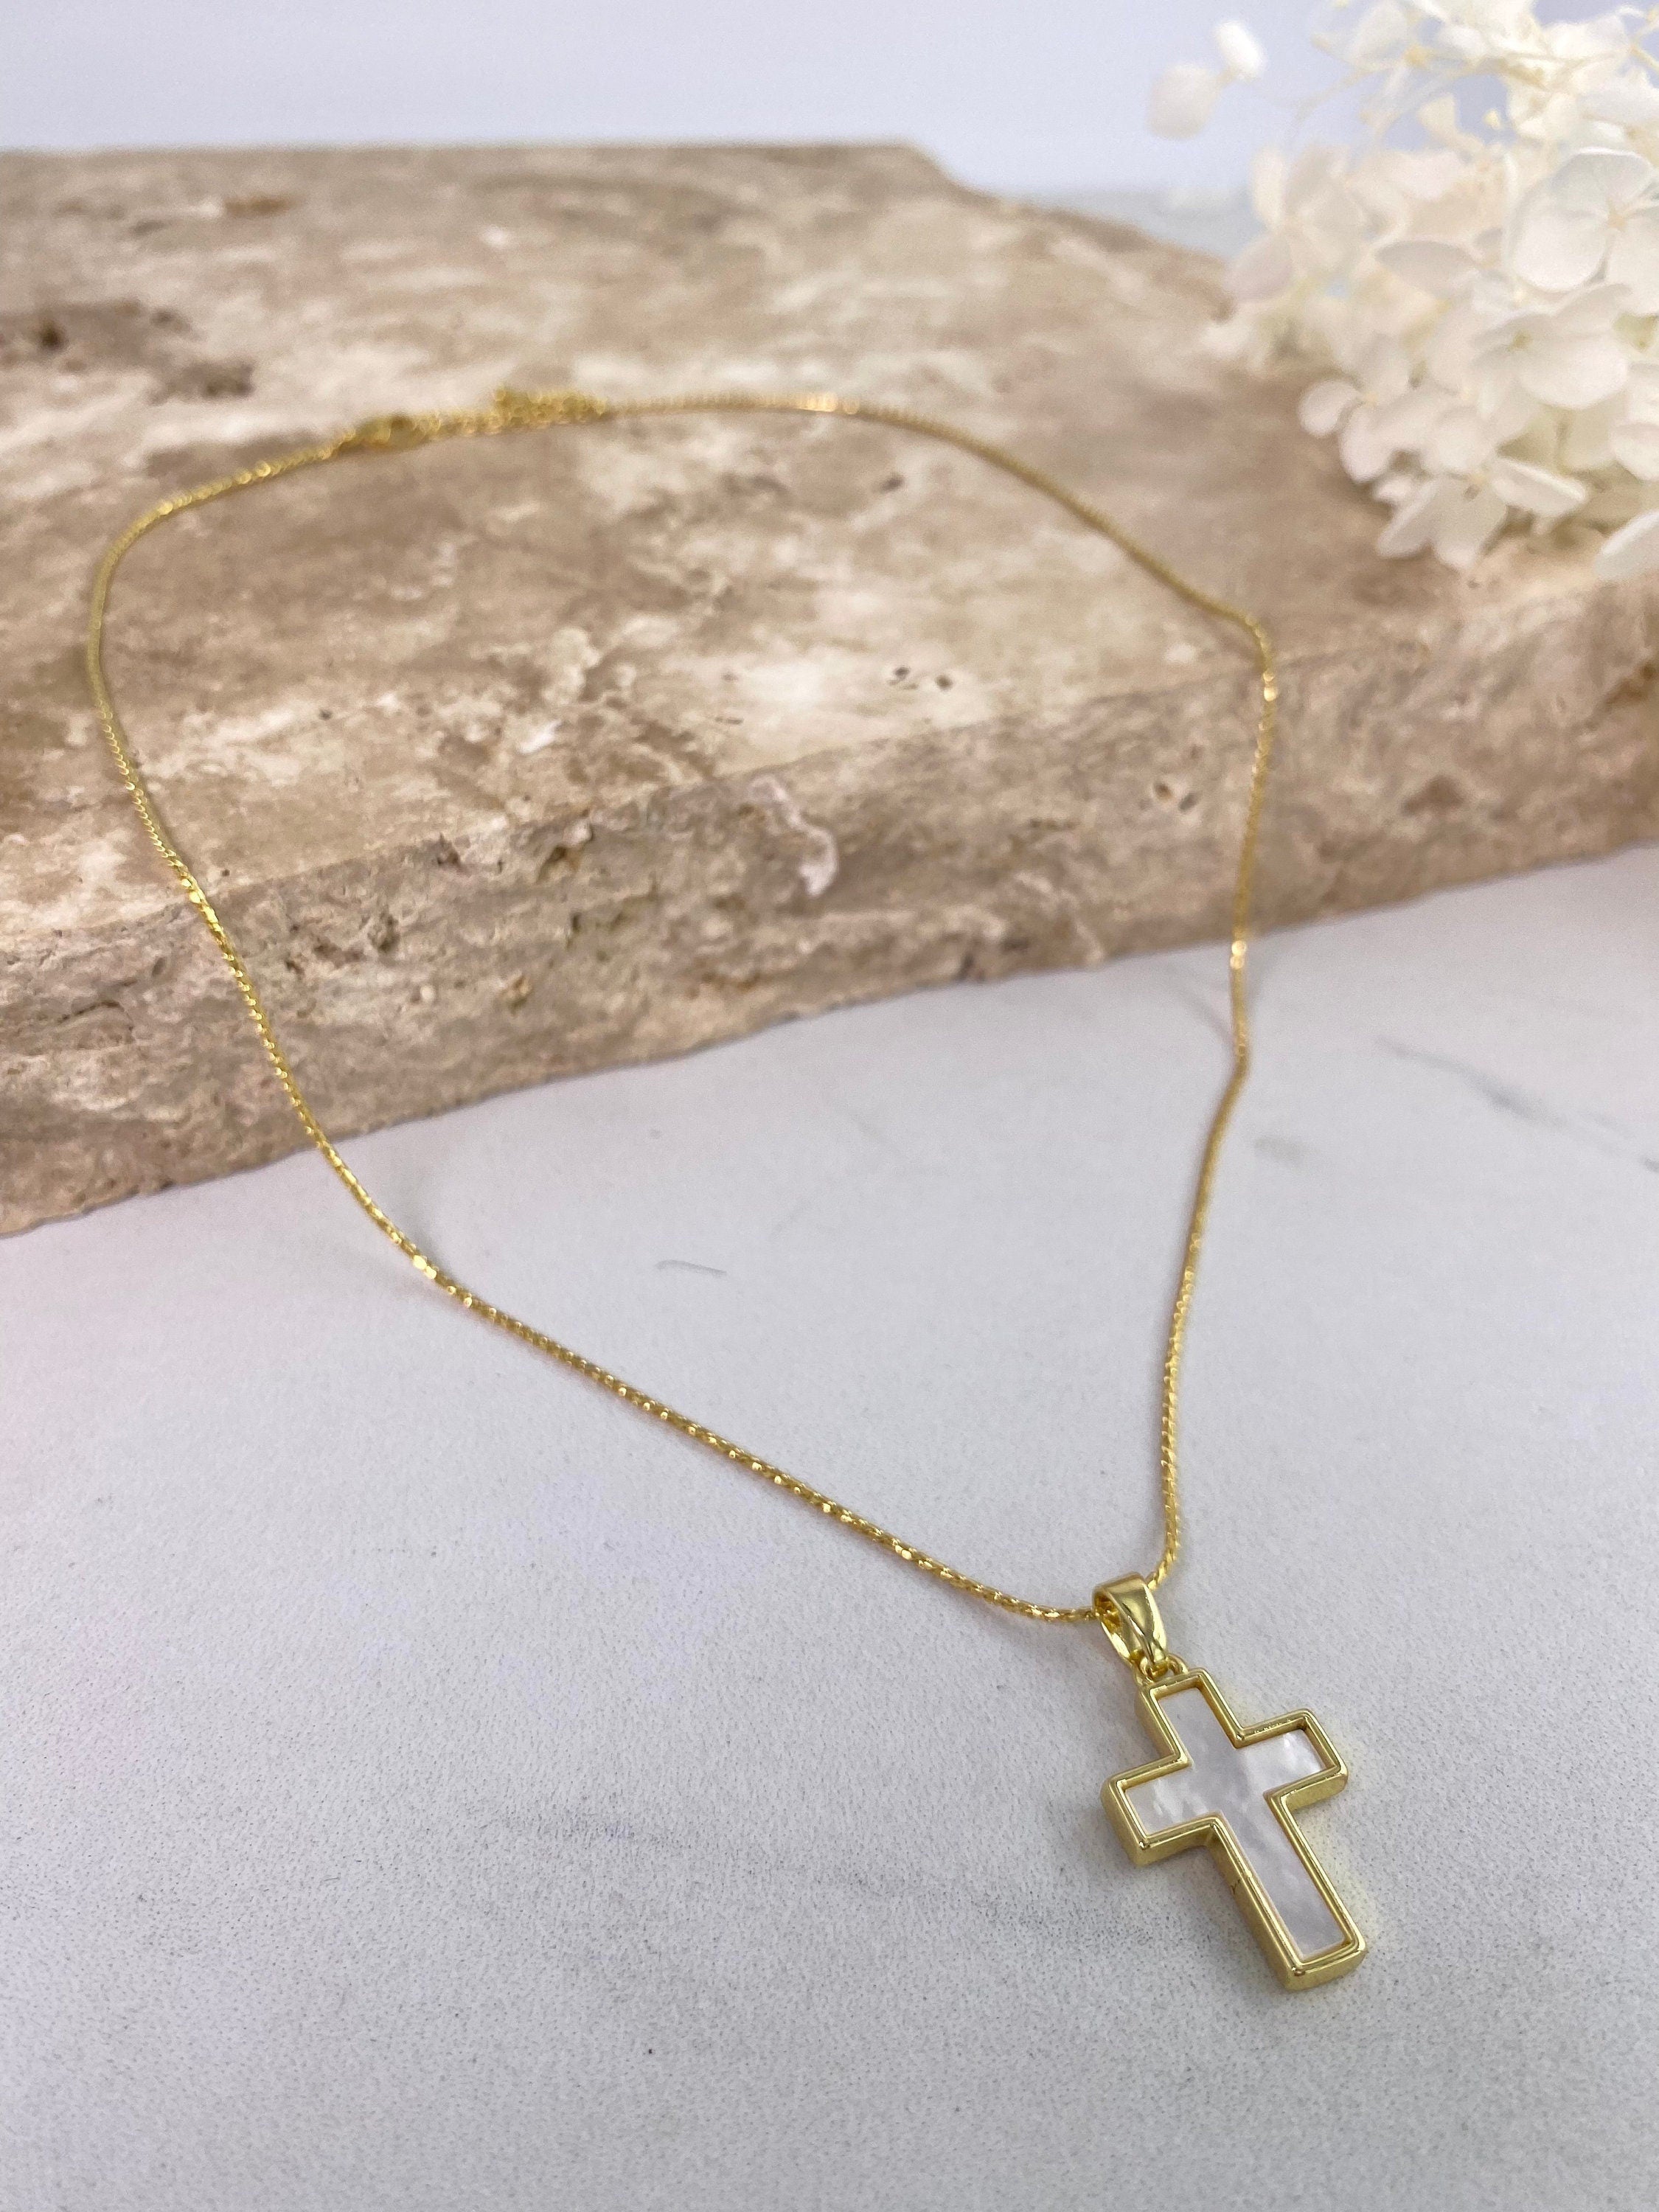 Womens Cross Necklace 24K Gold over Sterling Silver Religious Jewelry Gift  A-M Religious Gifts Church Goods